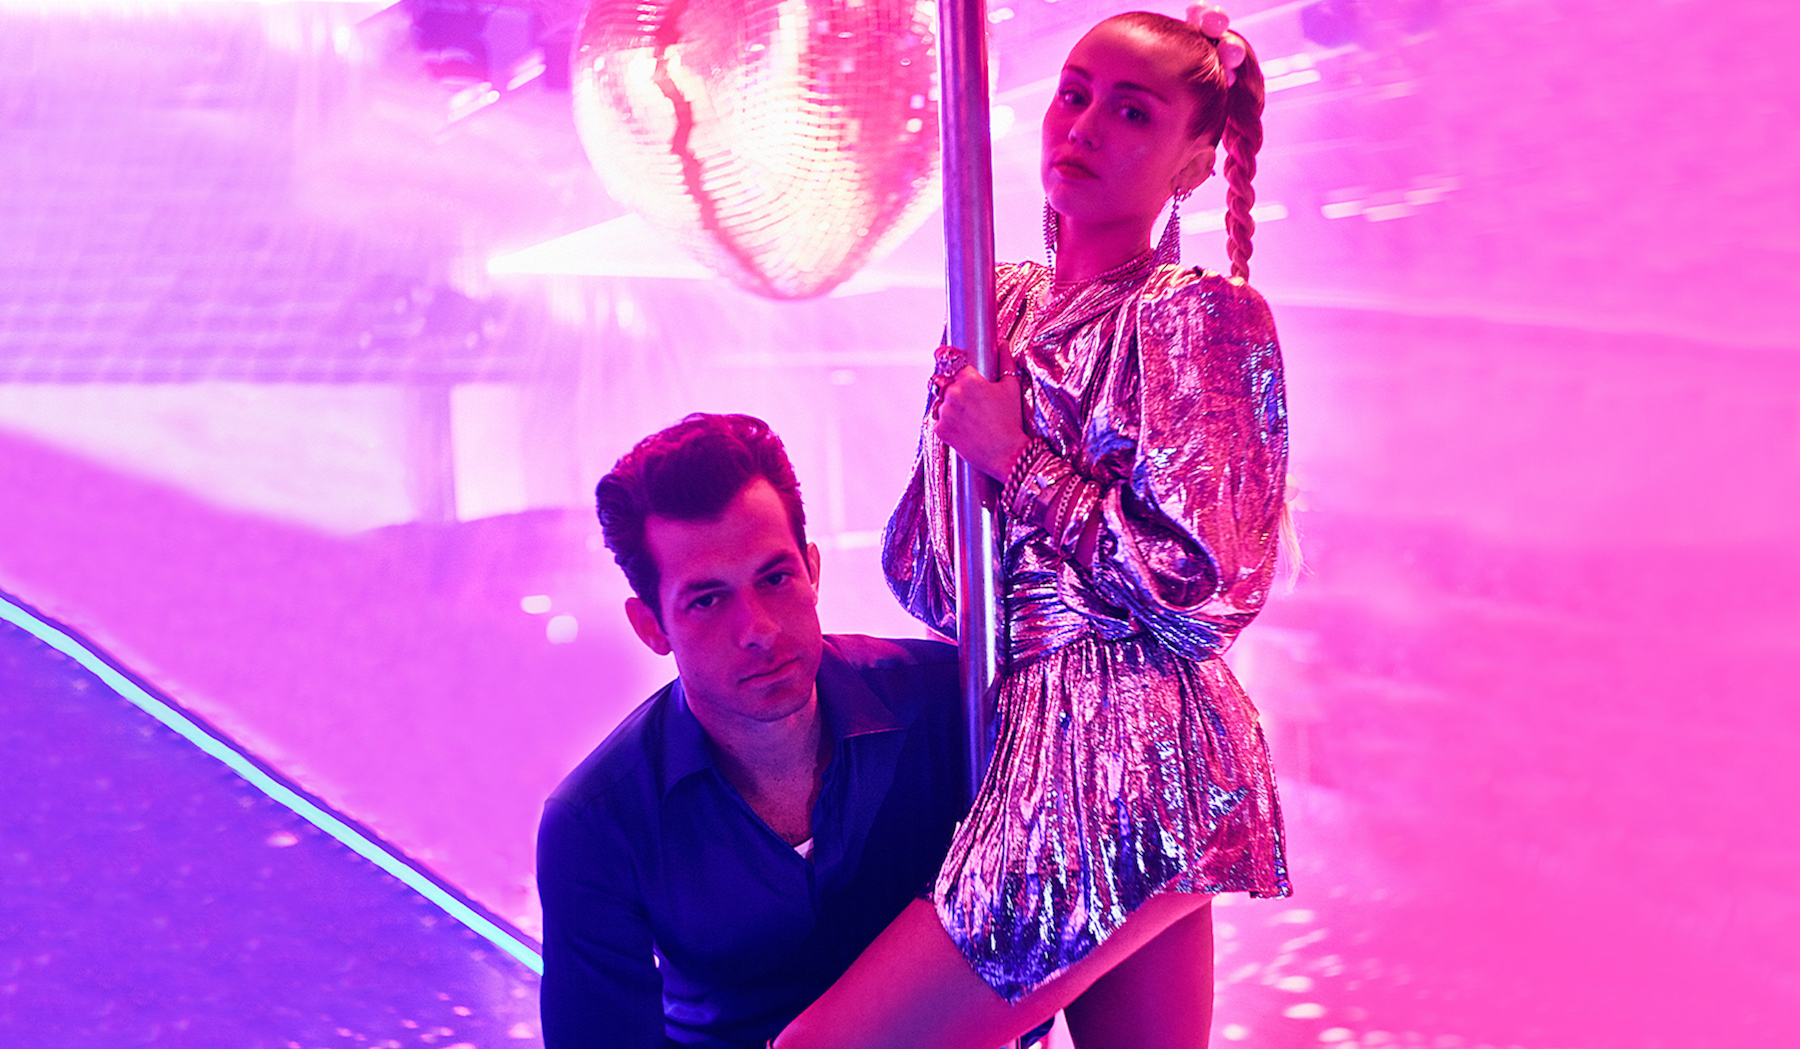 Single of the Day: Mark Ronson feat. Miley Cyrus - Nothing Breaks Like a Heart